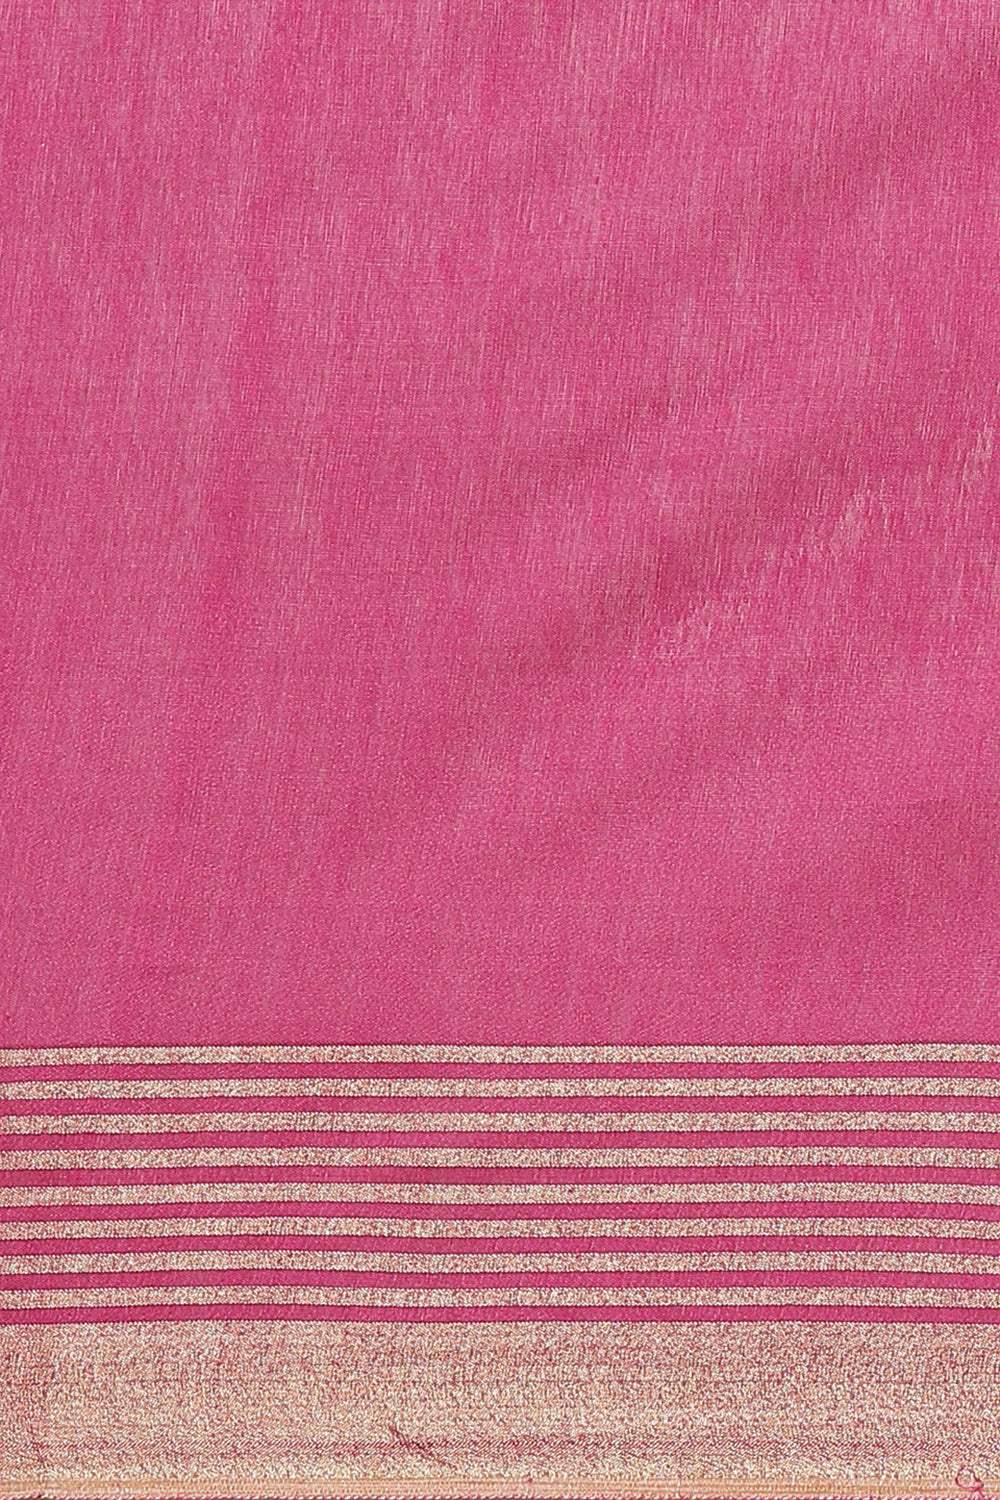 Woven Work Saree Collection at Karmaplace